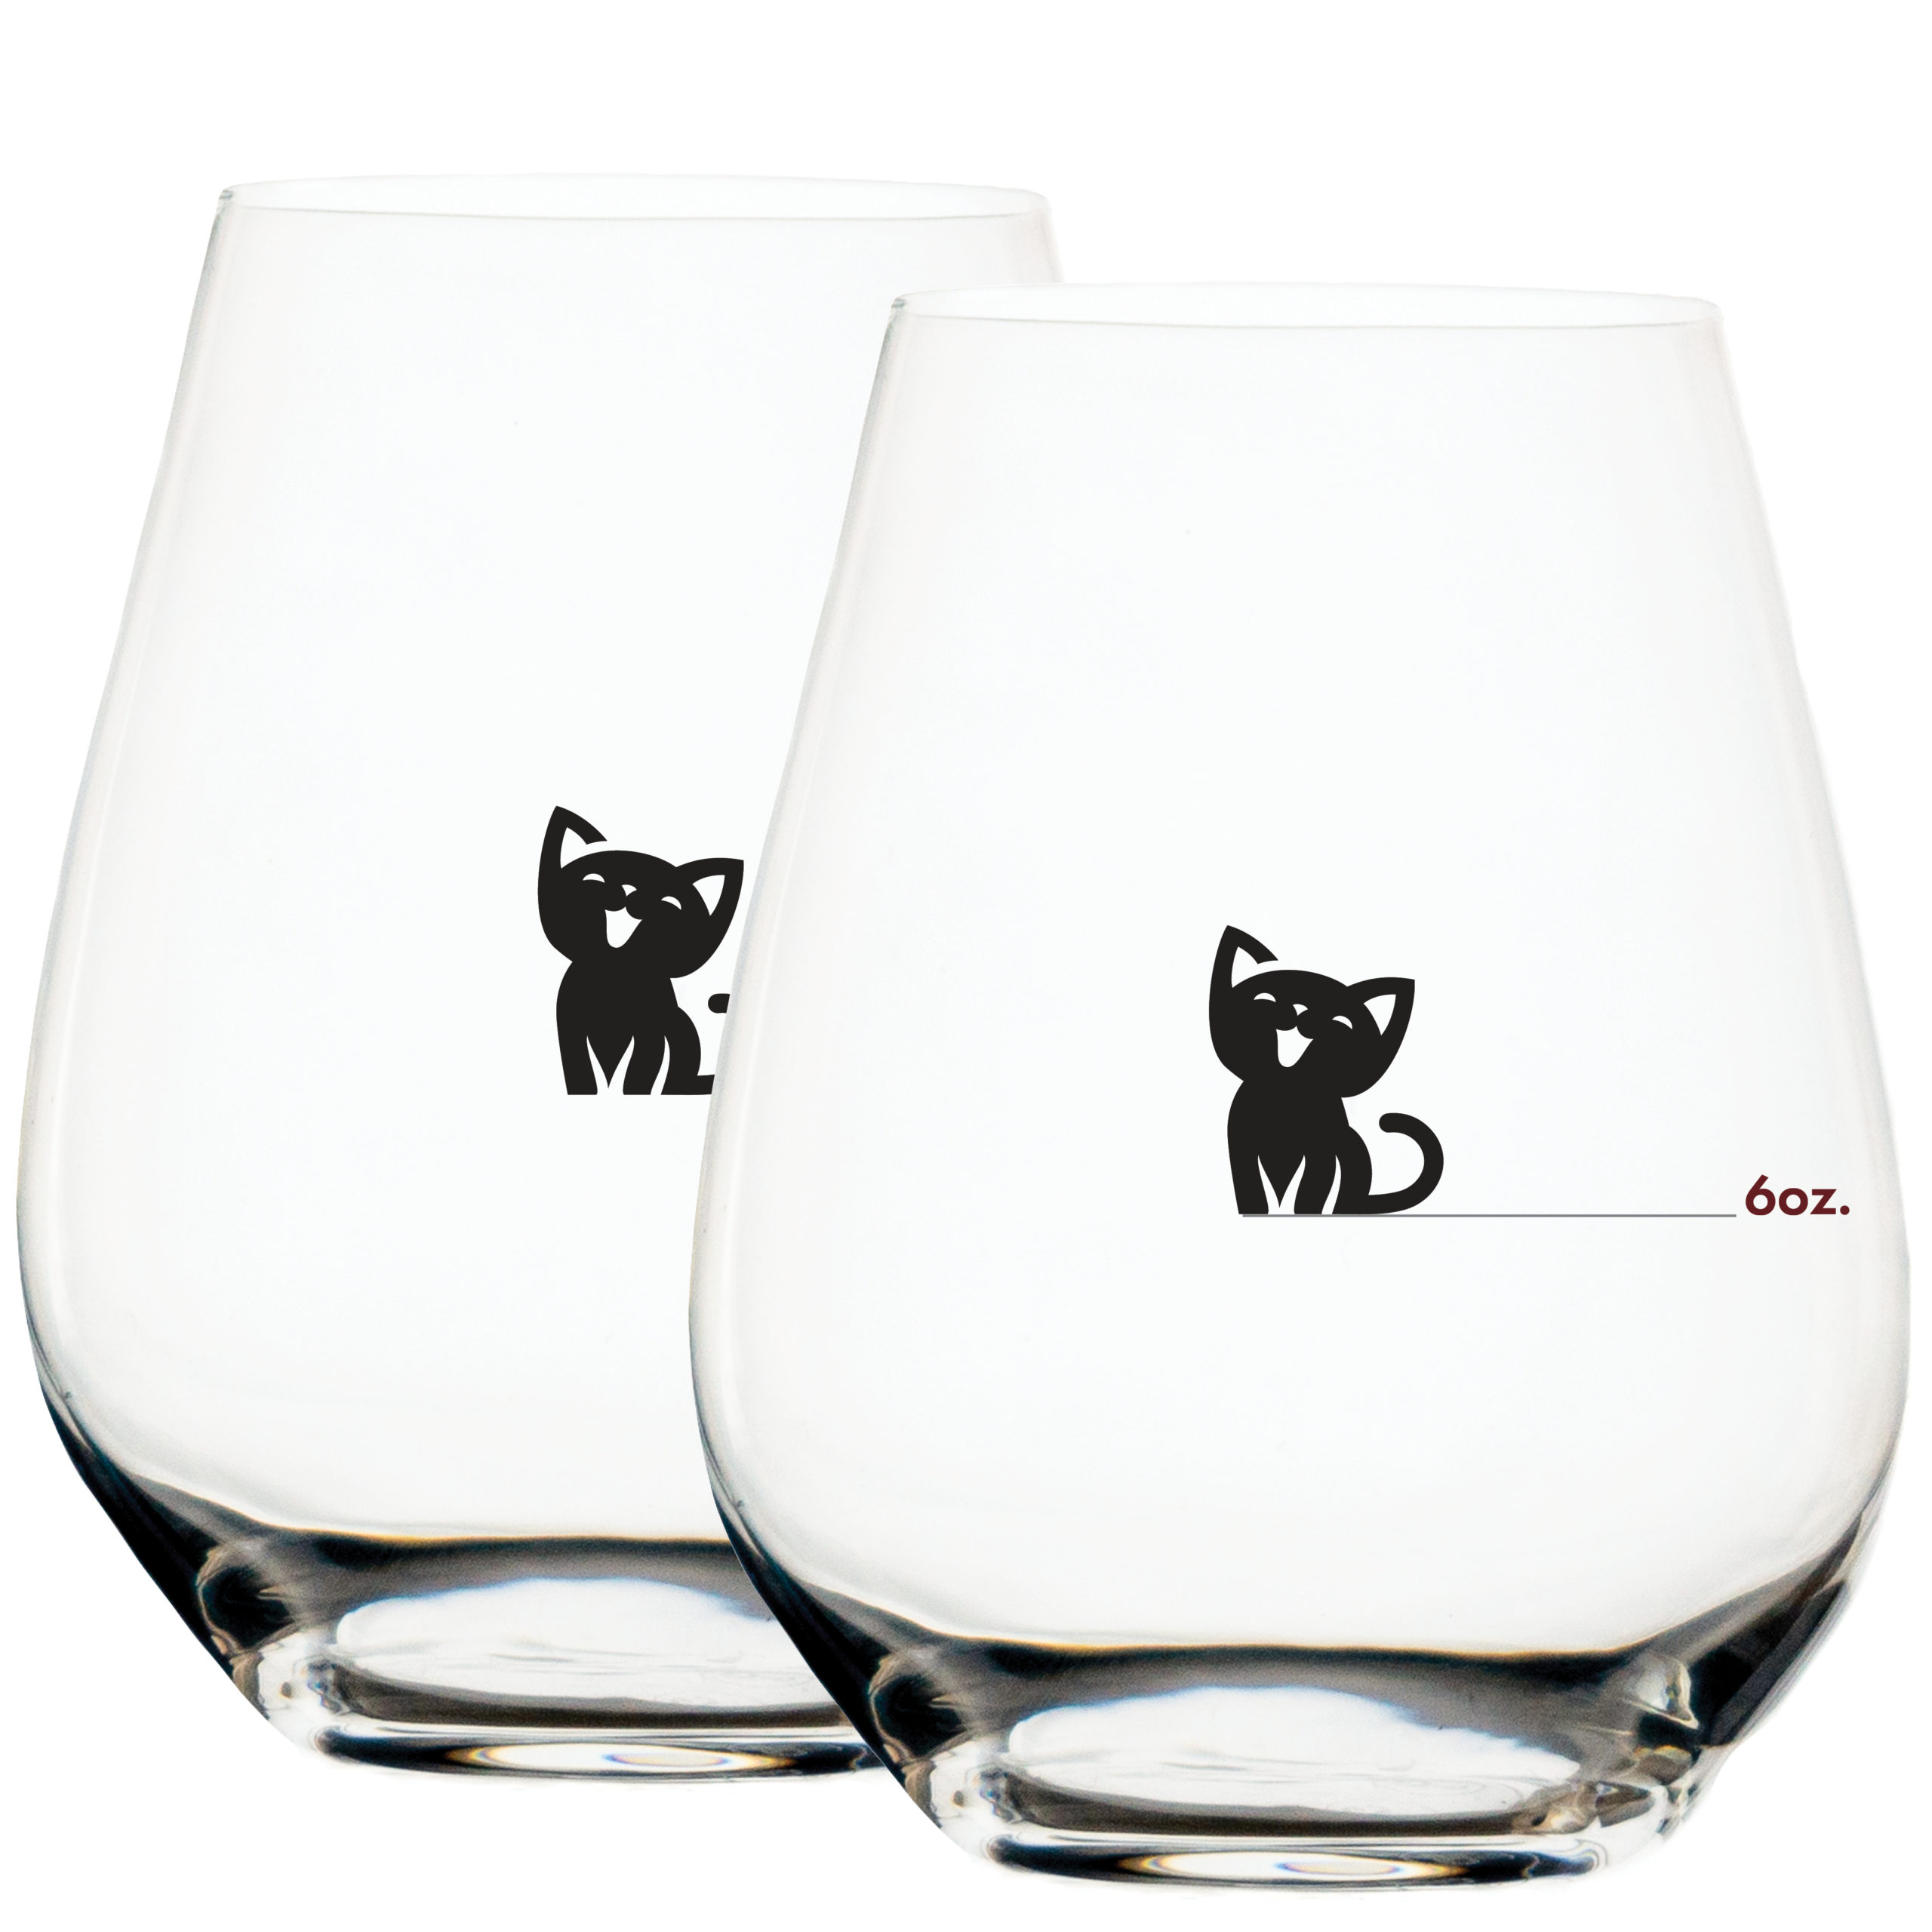 https://mr-picky.com/wp-content/uploads/2021/01/Large-Purrfect-Pour-Kitten-Stemless-Measuring-Wine-Glass-with-Measuring-Wine-Mark-of-6-ounces-line-scaled.jpg